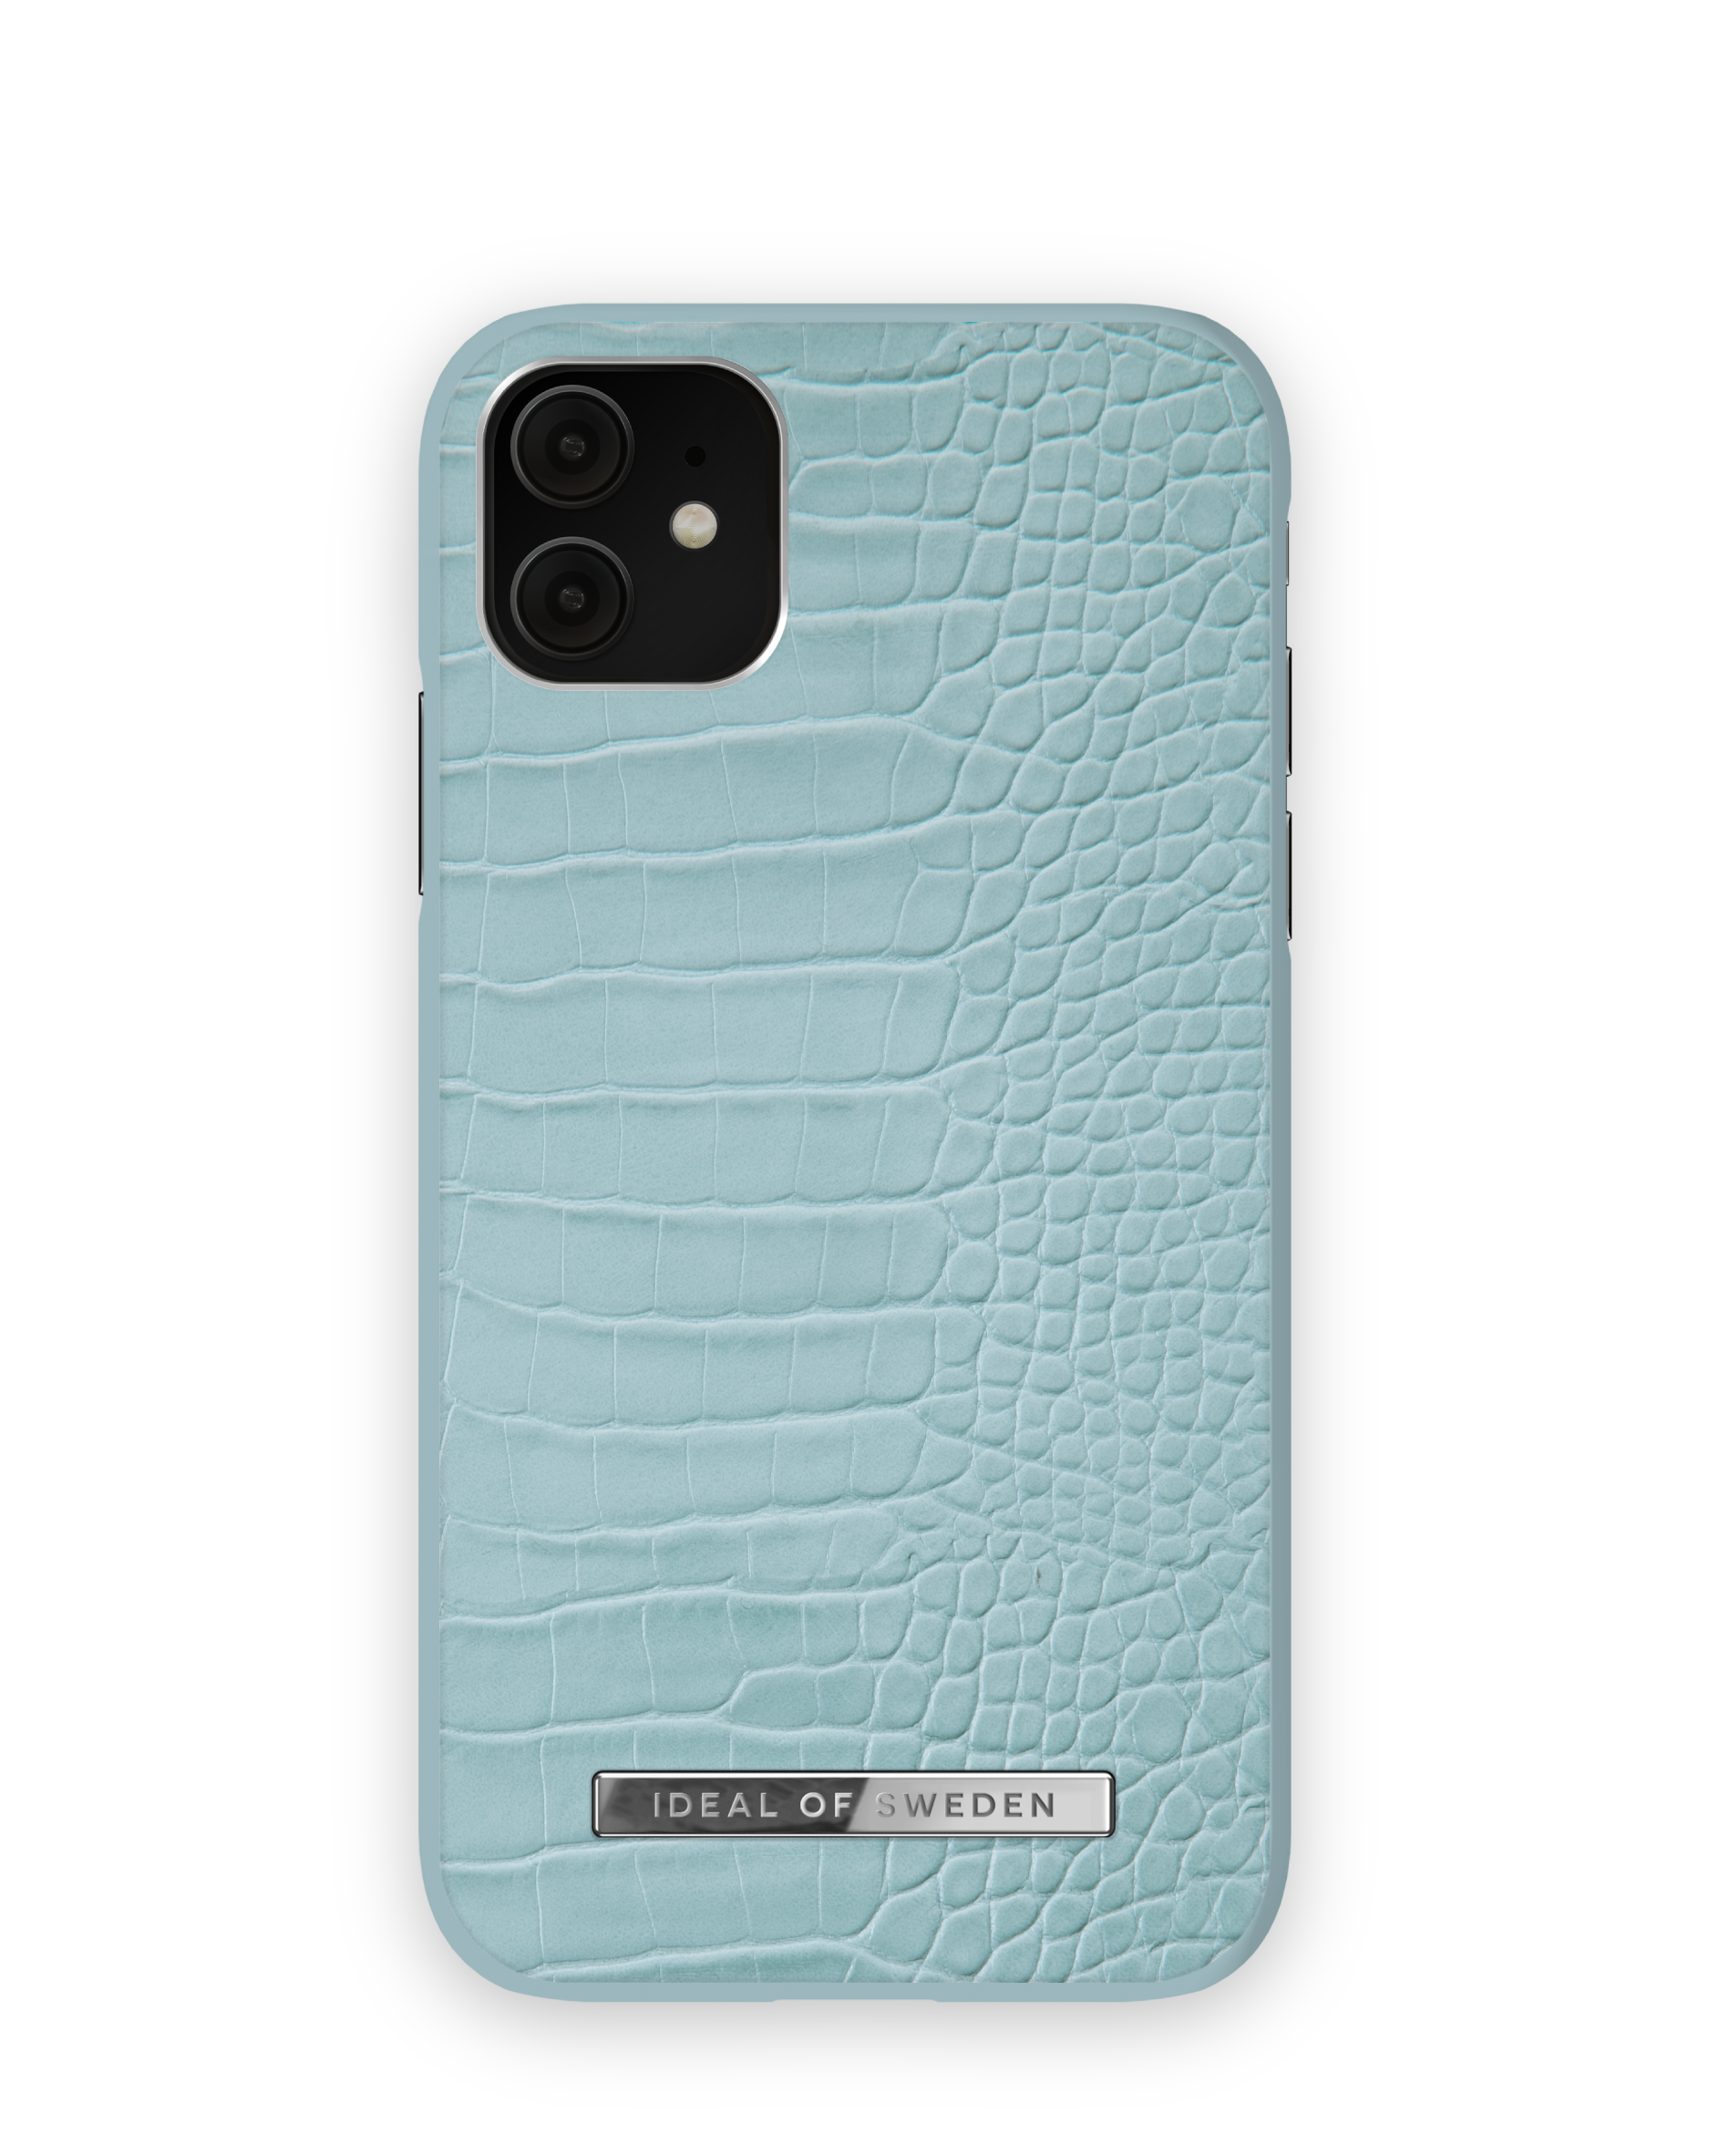 11 IDEAL Blue SWEDEN iPhone OF Backcover, iPhone Soft Apple, / Croco XR, IDACSS22-I1961-394,